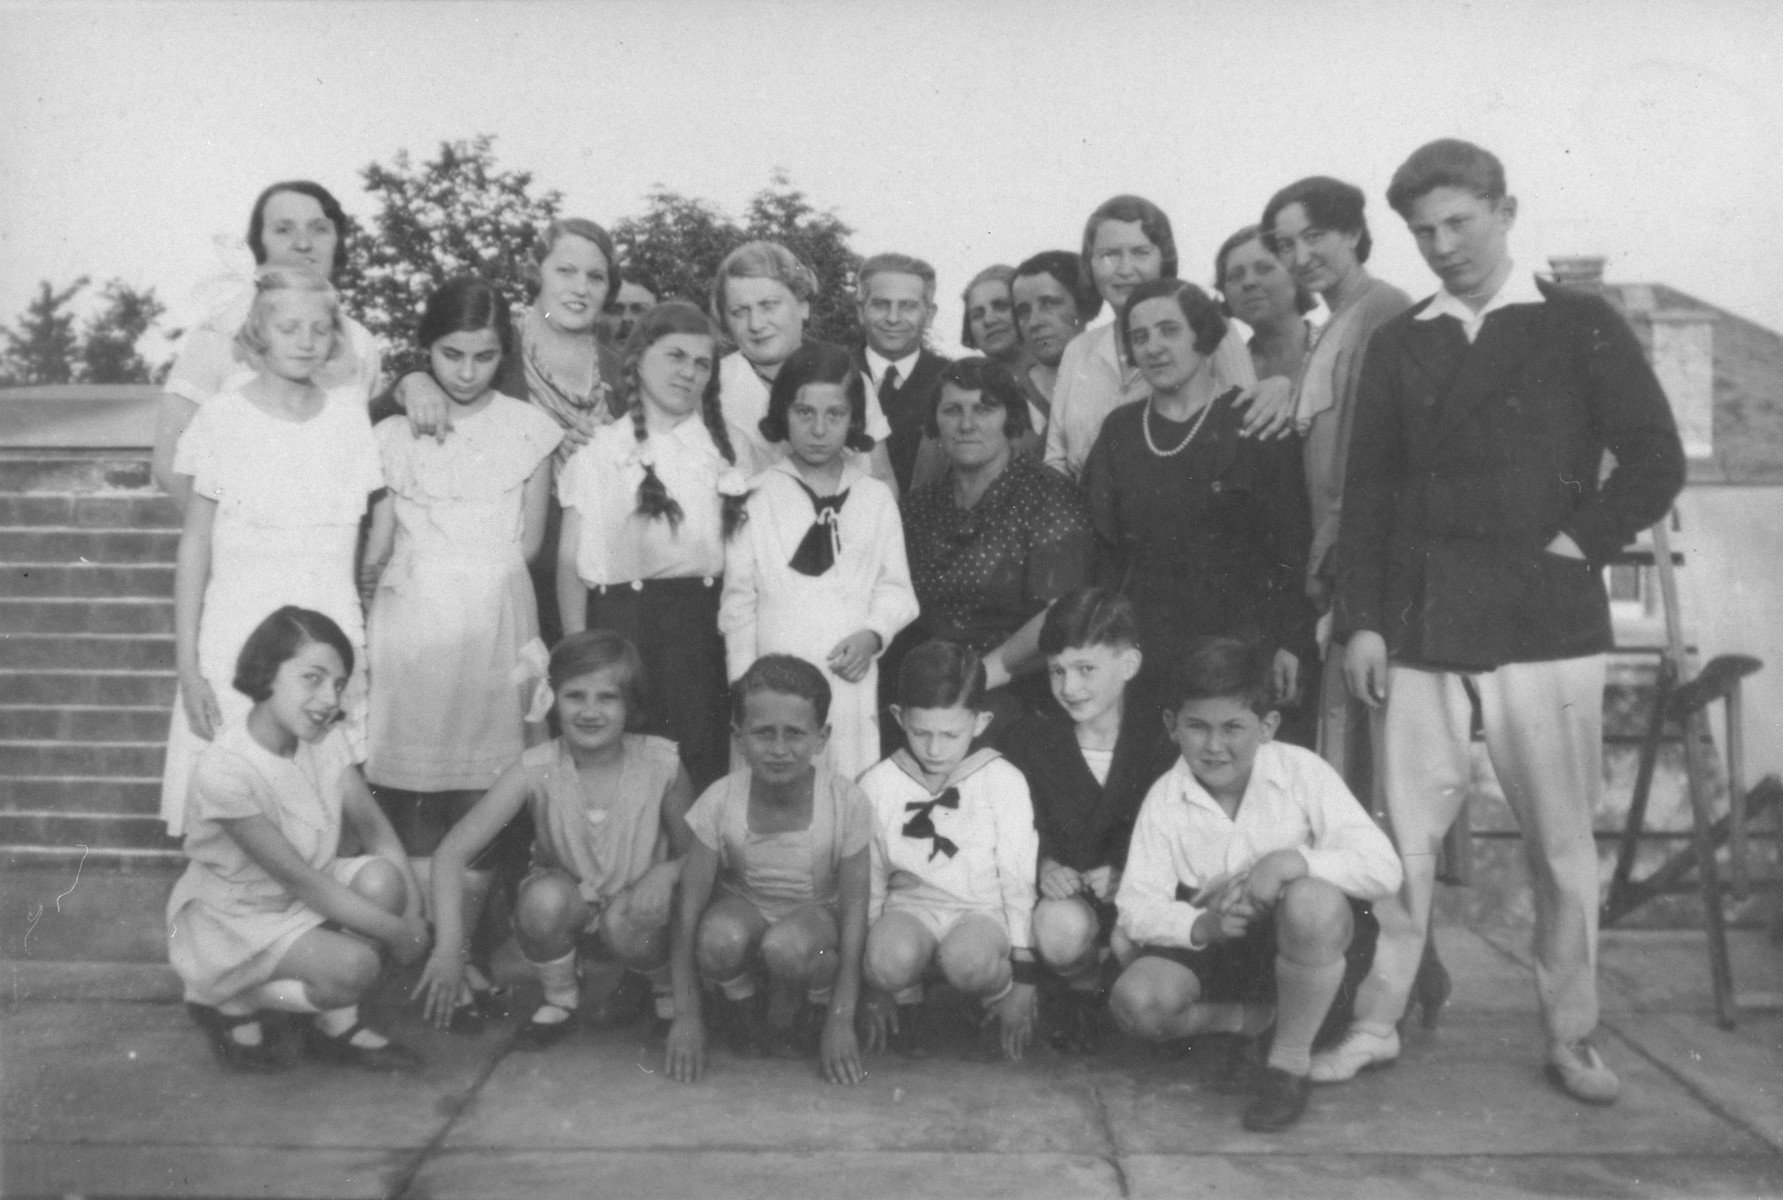 Members of the Veres family pose with friends at their summer home, where they are celebrating St. Stephen's Day.

Among those pictured are Thomas Veres (front row, right) and Berta Veres (seated in the middle of the second row).